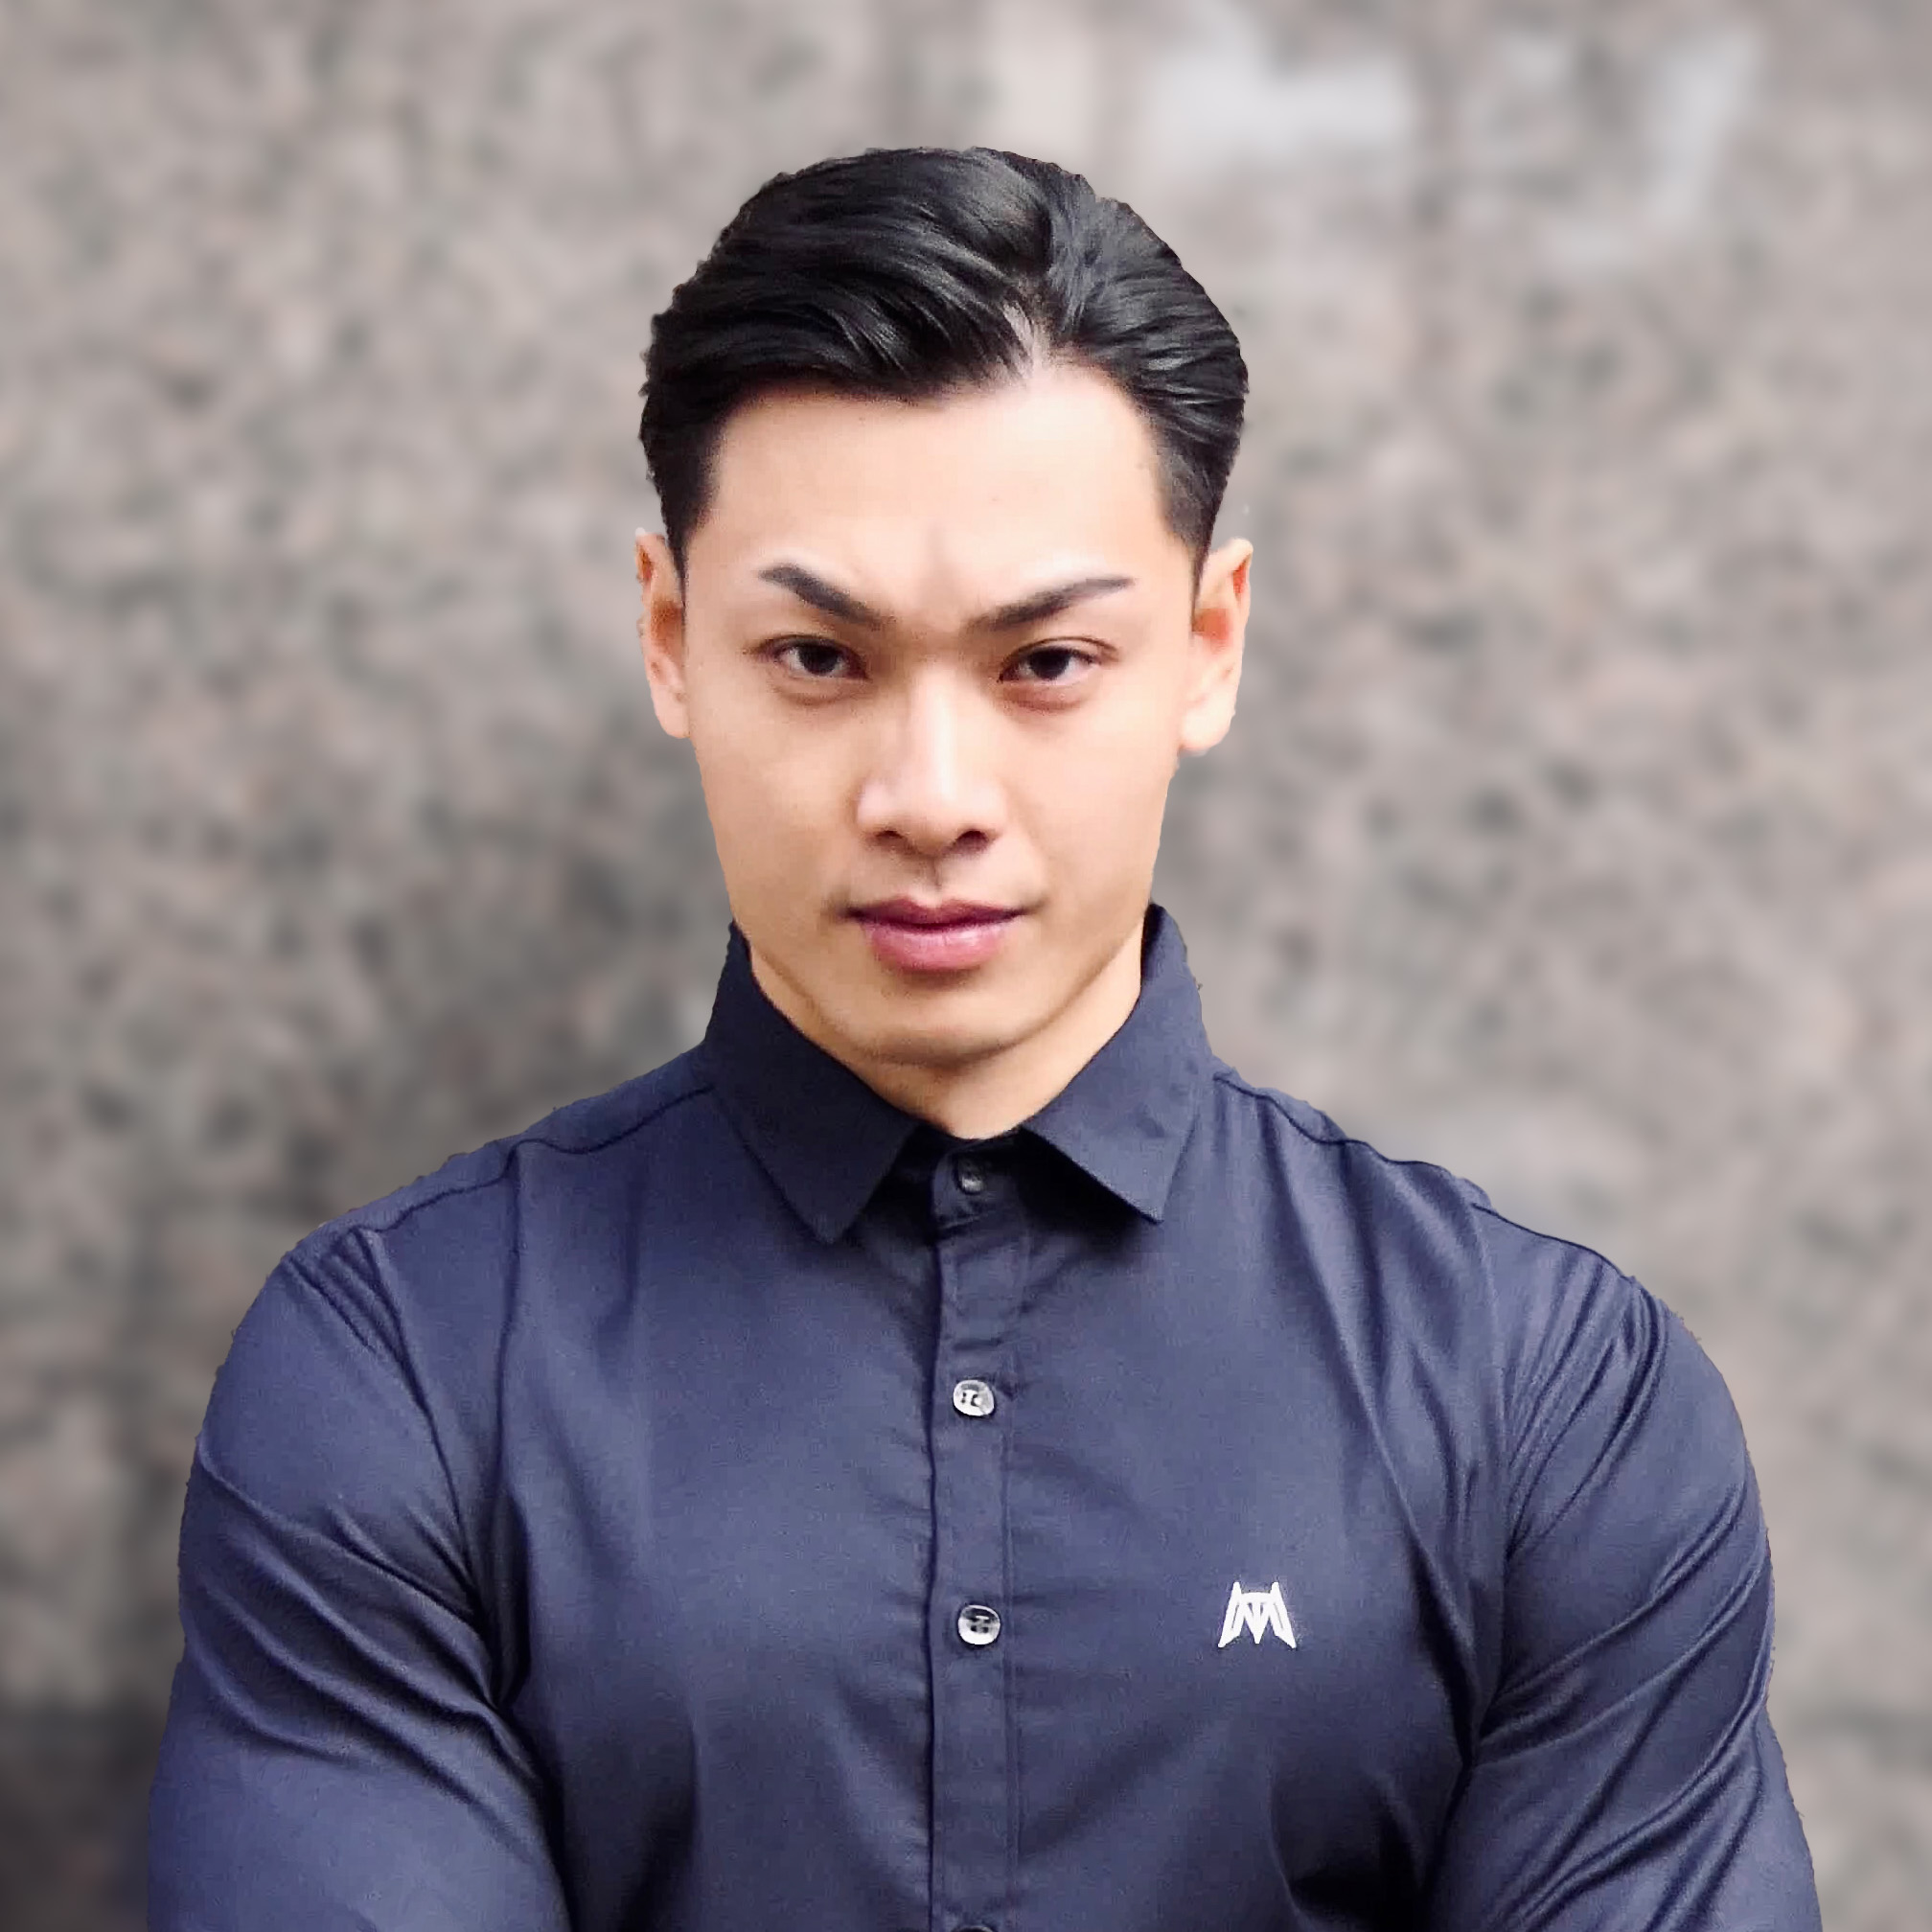 MUSCLE TAILOR | Muscle Fit Design For Men 健身時尚品牌 - ADDY | WNBF Pro